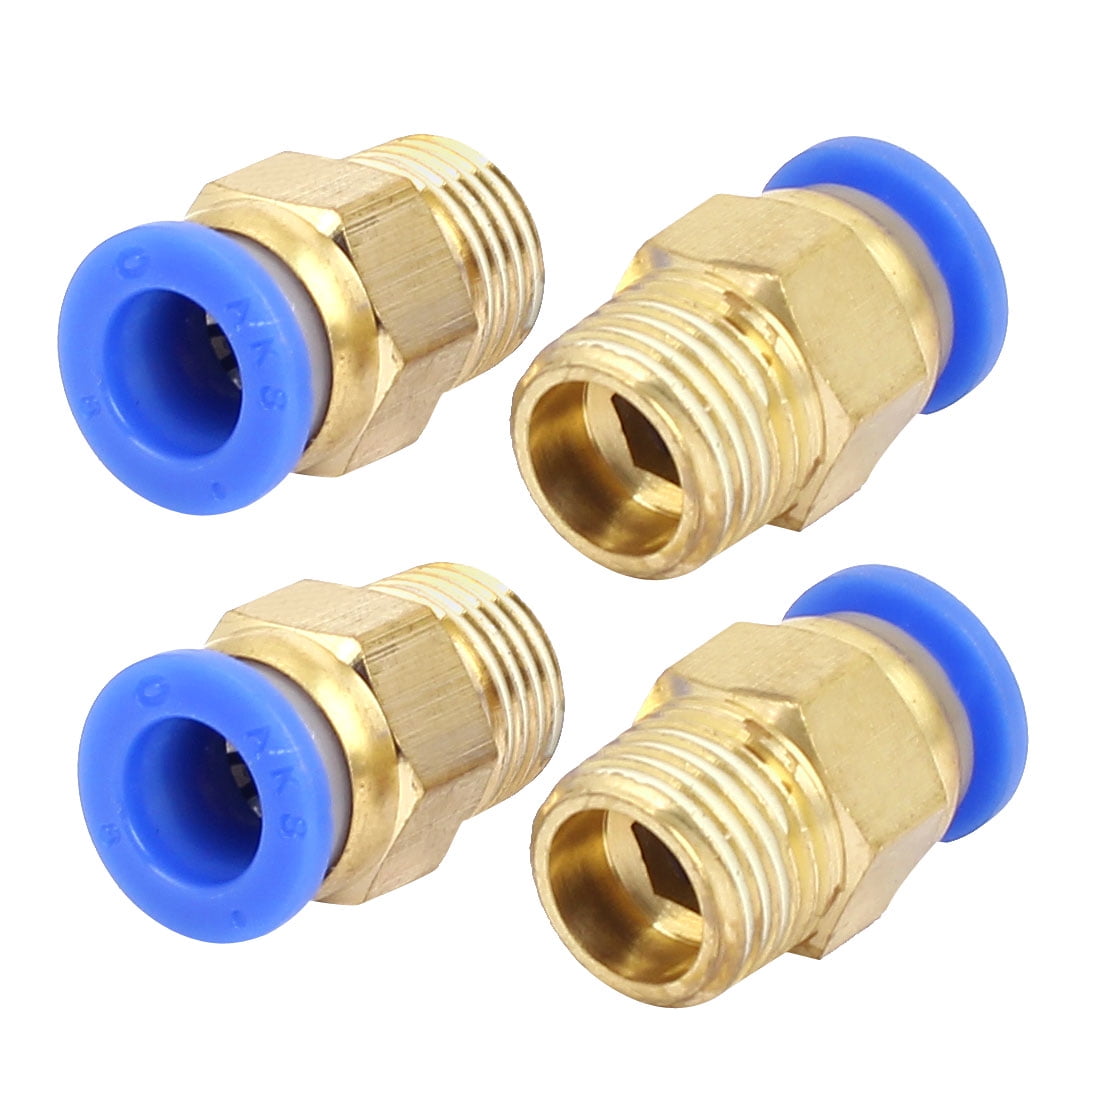 1/4" PT Male Thread to 8mm Air Pneumatic Hose Straight Quick Coupler 2pcs 